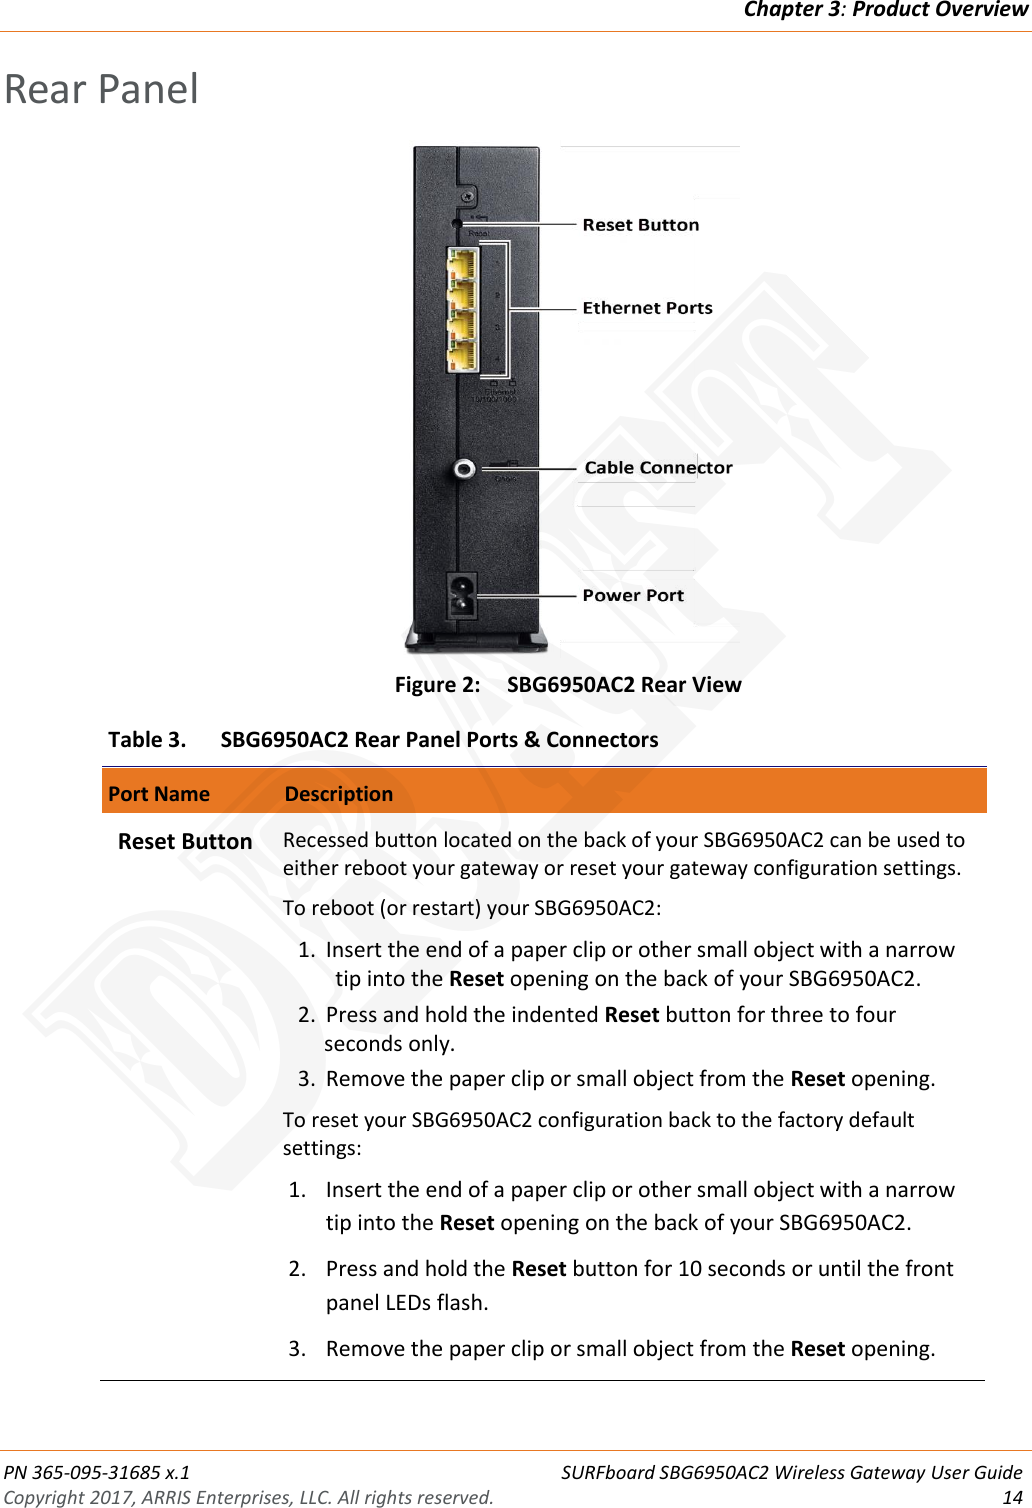 Chapter 3: Product Overview  PN 365-095-31685 x.1 SURFboard SBG6950AC2 Wireless Gateway User Guide Copyright 2017, ARRIS Enterprises, LLC. All rights reserved. 14  Rear Panel  Figure 2: SBG6950AC2 Rear View Table 3. SBG6950AC2 Rear Panel Ports &amp; Connectors  Port Name  Description         Blinking On (Solid)  Reset Button Recessed button located on the back of your SBG6950AC2 can be used to either reboot your gateway or reset your gateway configuration settings. To reboot (or restart) your SBG6950AC2: 1. Insert the end of a paper clip or other small object with a narrow tip into the Reset opening on the back of your SBG6950AC2. 2. Press and hold the indented Reset button for three to four seconds only. 3. Remove the paper clip or small object from the Reset opening.  To reset your SBG6950AC2 configuration back to the factory default settings: 1. Insert the end of a paper clip or other small object with a narrow tip into the Reset opening on the back of your SBG6950AC2. 2. Press and hold the Reset button for 10 seconds or until the front panel LEDs flash.  3. Remove the paper clip or small object from the Reset opening.  DRAFT